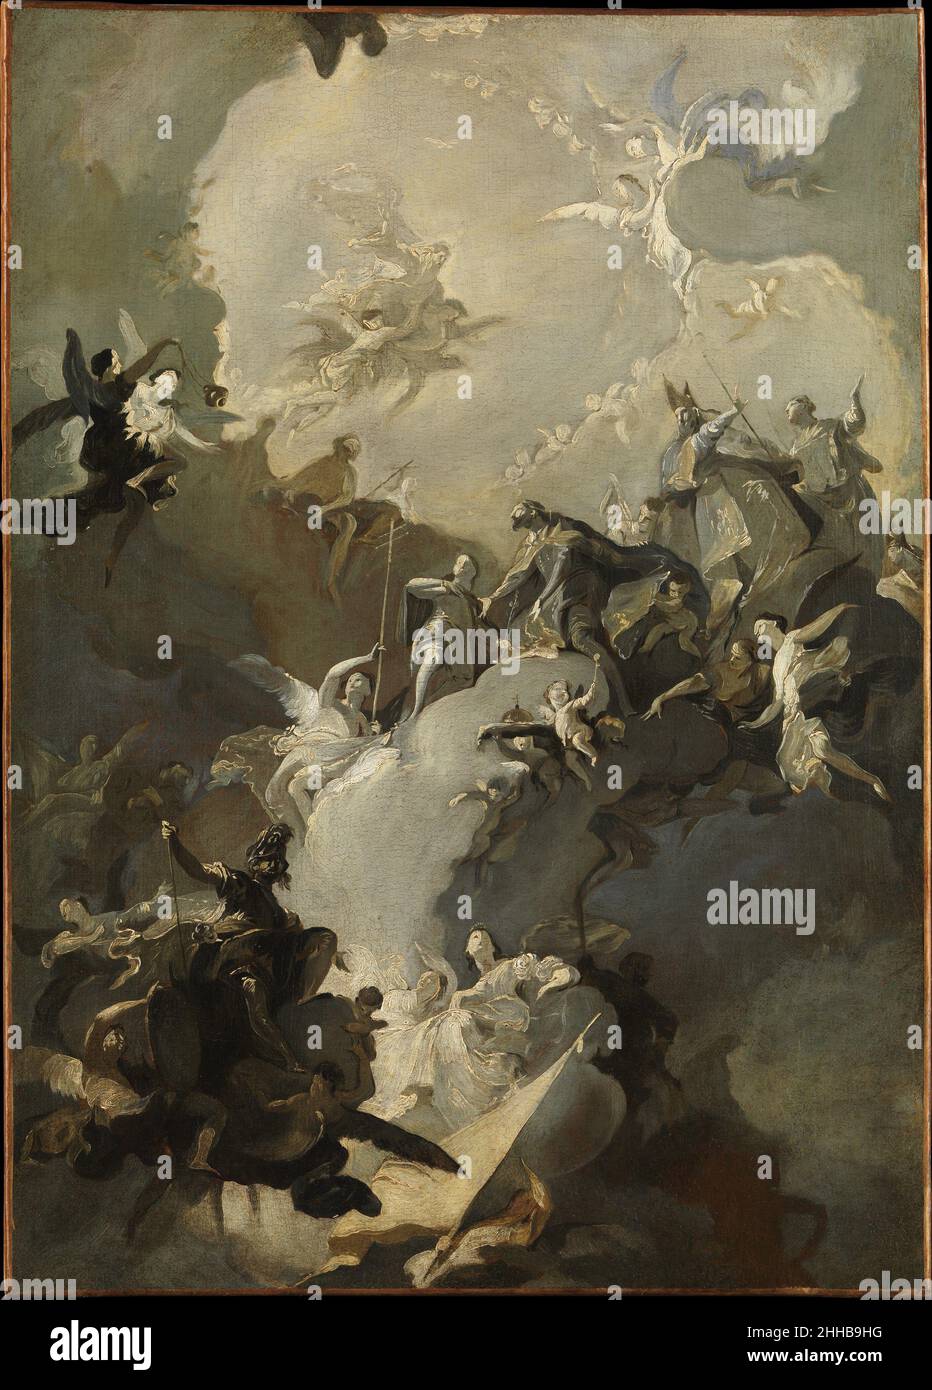 The Glorification of the Royal Hungarian Saints ca. 1772–73 Franz Anton Maulbertsch Austrian Monochrome, or grisaille, oil sketches allowed artists to work out complex light effects independent of the diverse color palette used in the final painting. This work, with its sophisticated spatial organization, was executed for the Hungarian Cathedral Basilica of Gyor (Raab) by Maulbertsch, the outstanding Austrian exponent of the Venetian tradition embodied by Tiepolo. Saint Ladislaus I (1040–1095), king of Hungary, appears at lower left, while an earlier king, Saint Stephen (975–1038) and his son, Stock Photo